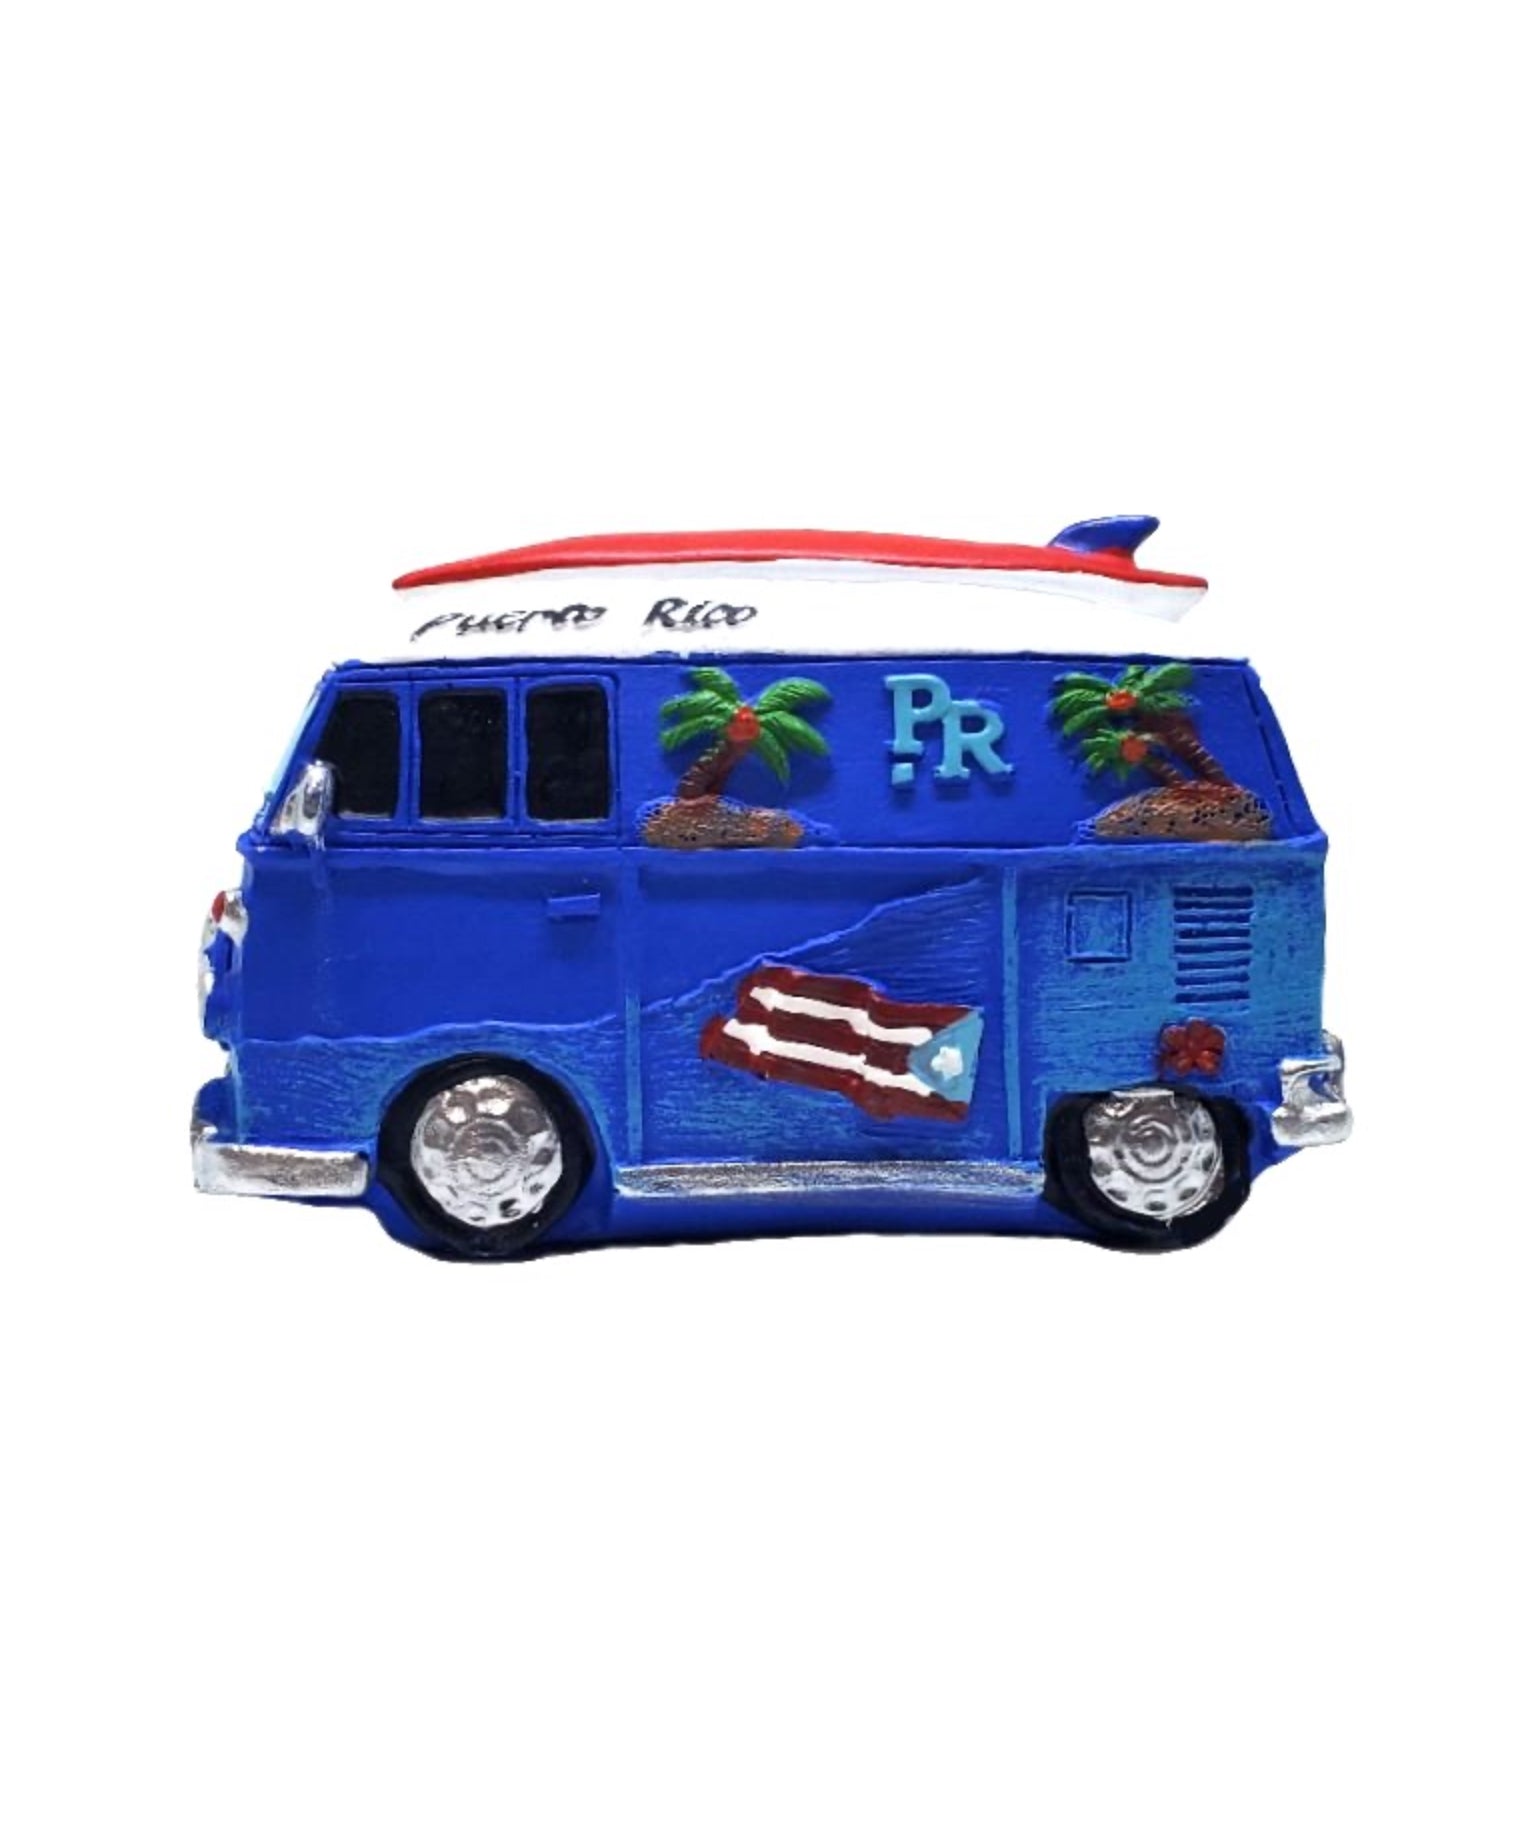 Puerto Rico VW Surf Bus Figures 4" Inches